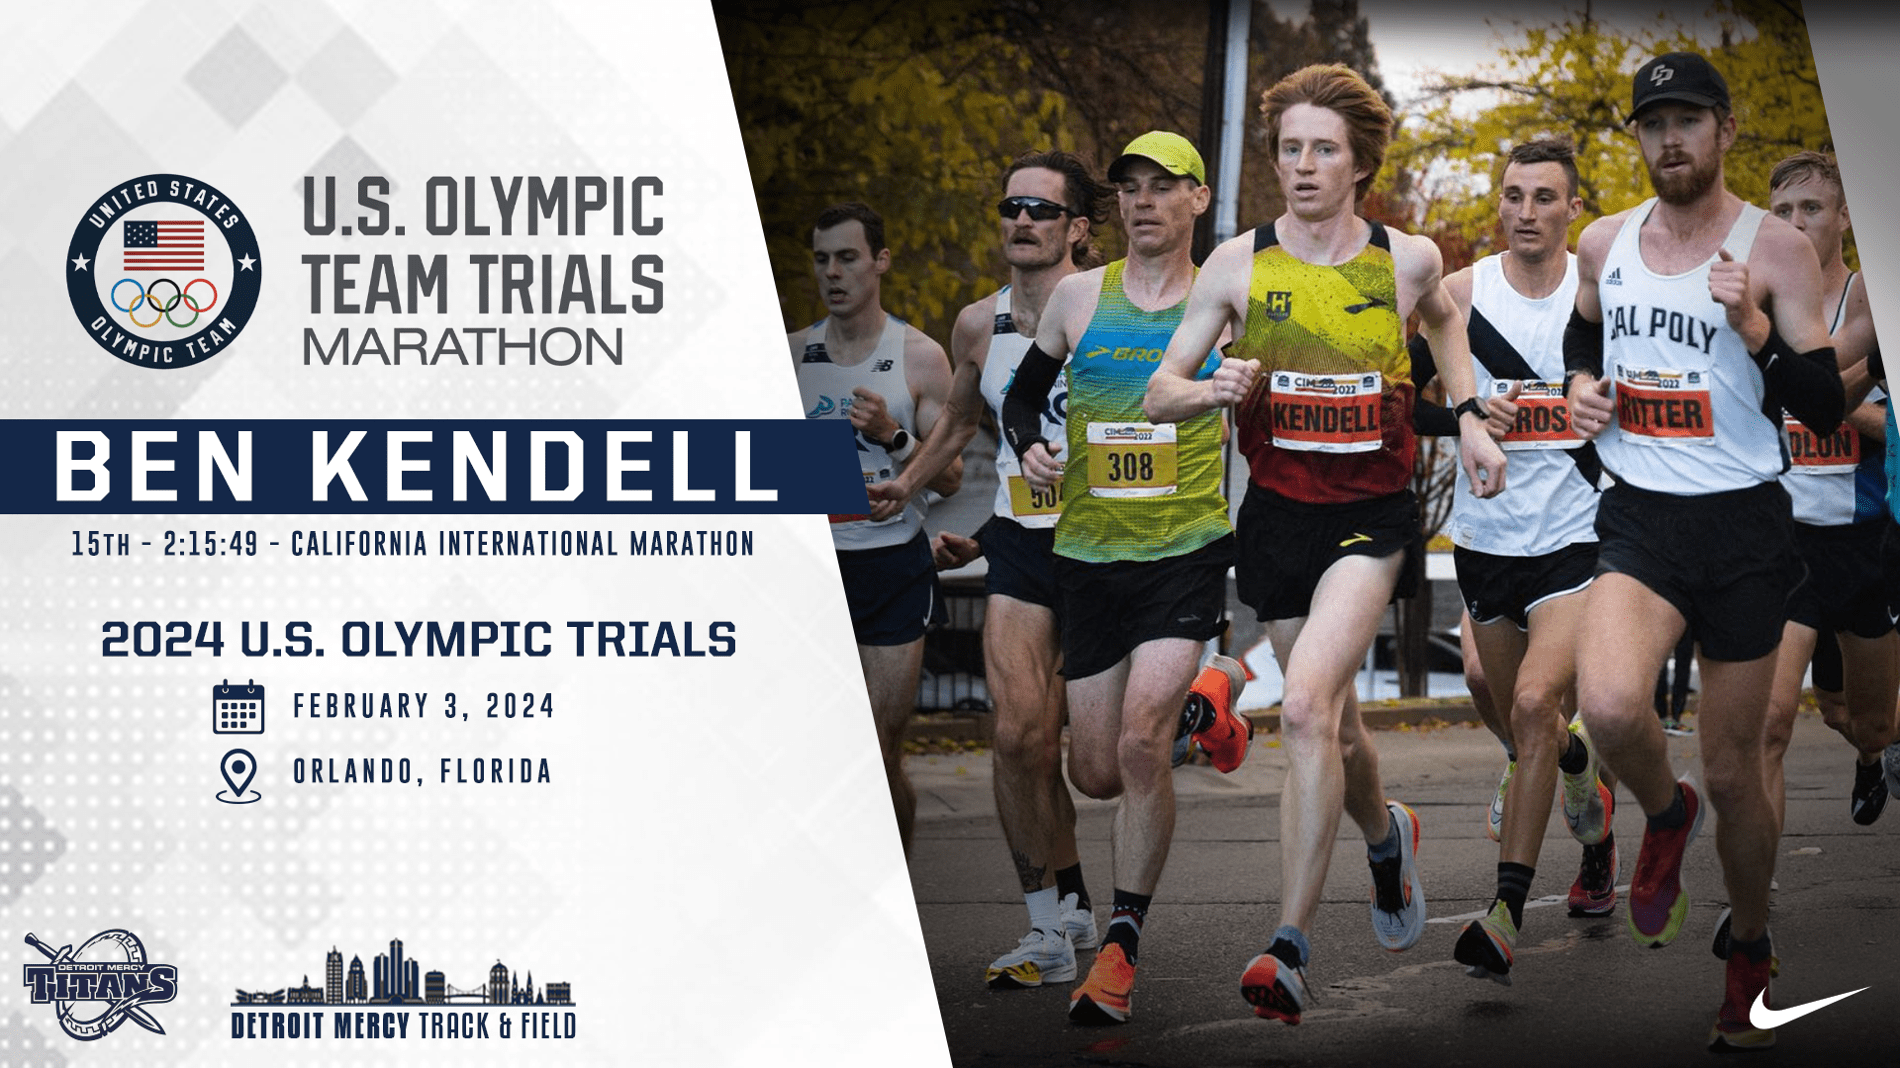 A graphic featuring a photo of seven runners, with one in front wearing a bib that reads Kendell. Text on graphic reads, U.S. Olympic Team Trials Marathon, Ben Kendell, 15th, 2:15:49, California International Marathon, 2024 U.S. Olympic Trials, February 3, 2024, Orlando, Florida, Detroit Mercy Track and Field.